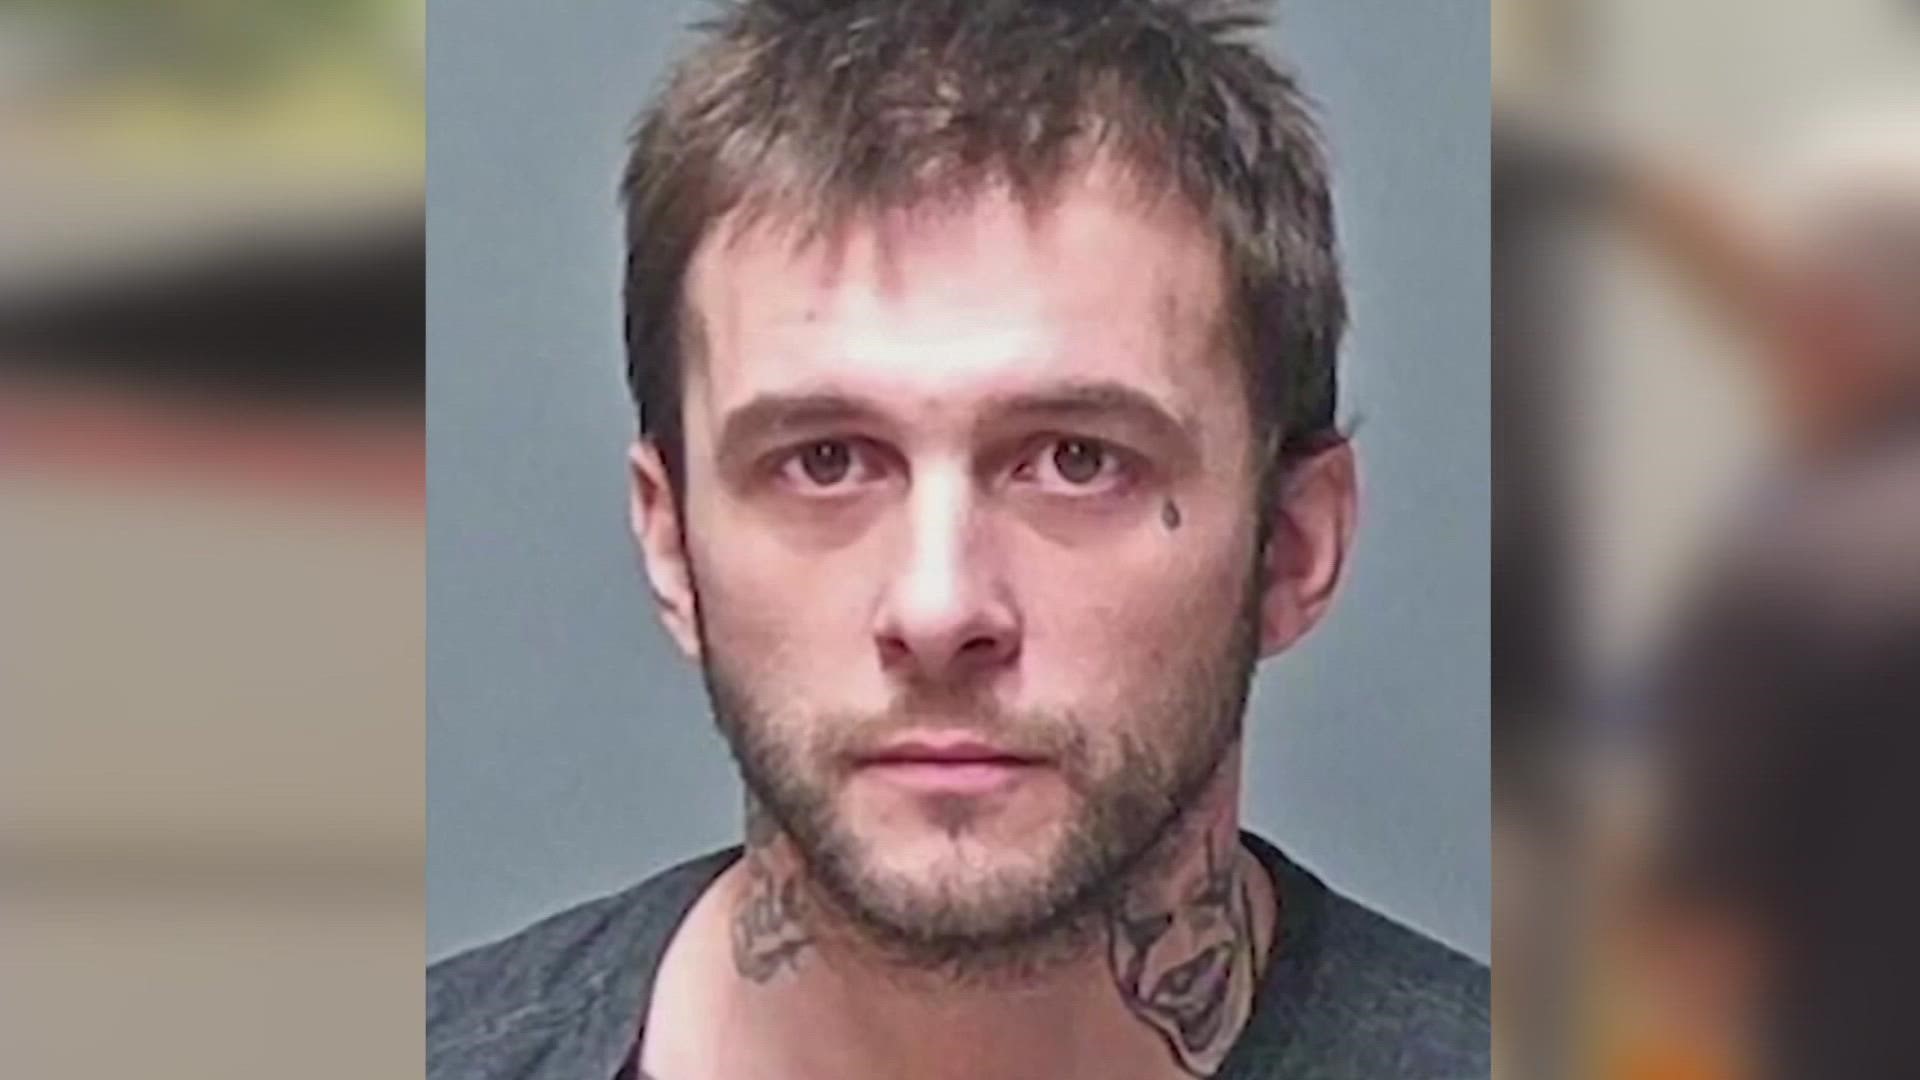 Adam Montgomery, 32, was arrested and faces four charges in connection with his daughter's death.